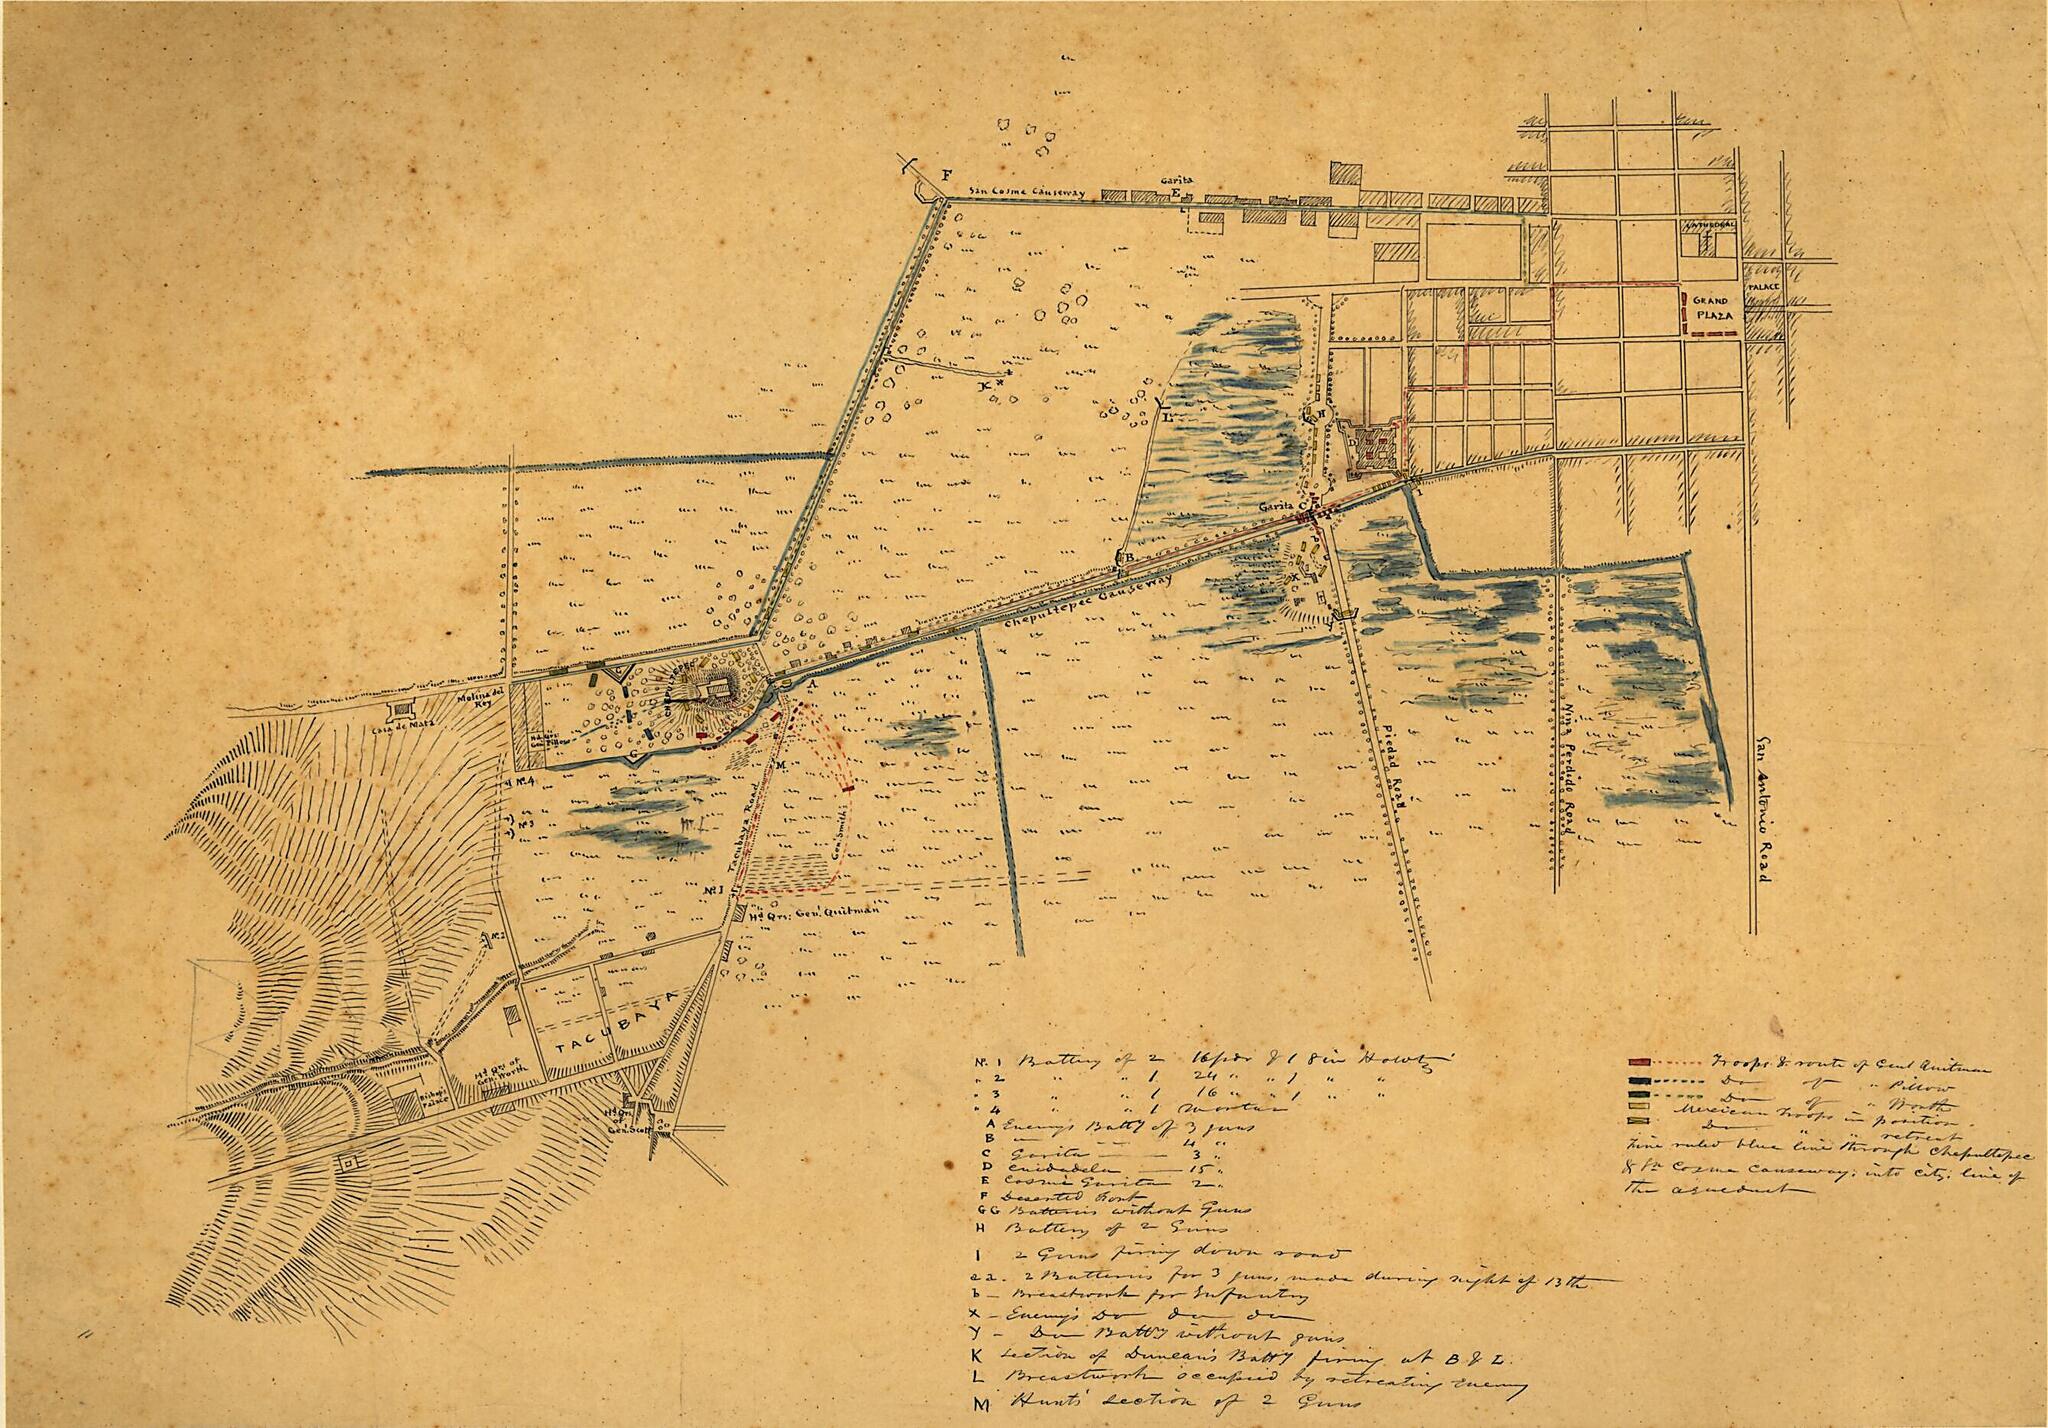 This old map of United States Attack of Mexico City, September 13th and 14th, from 1847 was created by Joseph Goldsborough Bruff in 1847